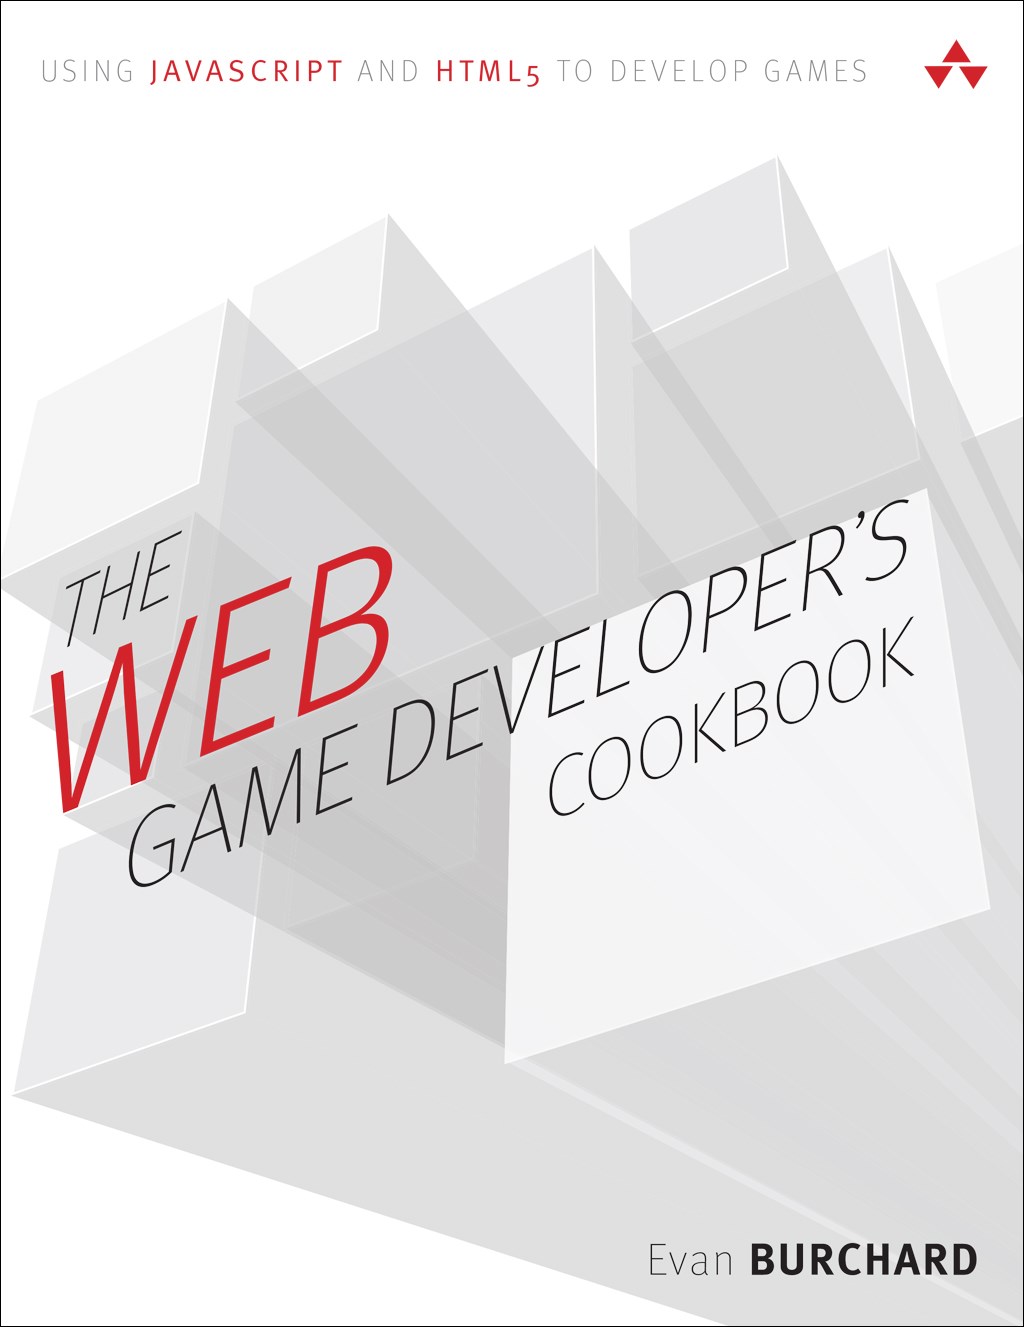 Web Game Developer's Cookbook, The: Using JavaScript and HTML5 to Develop Games (paperback)